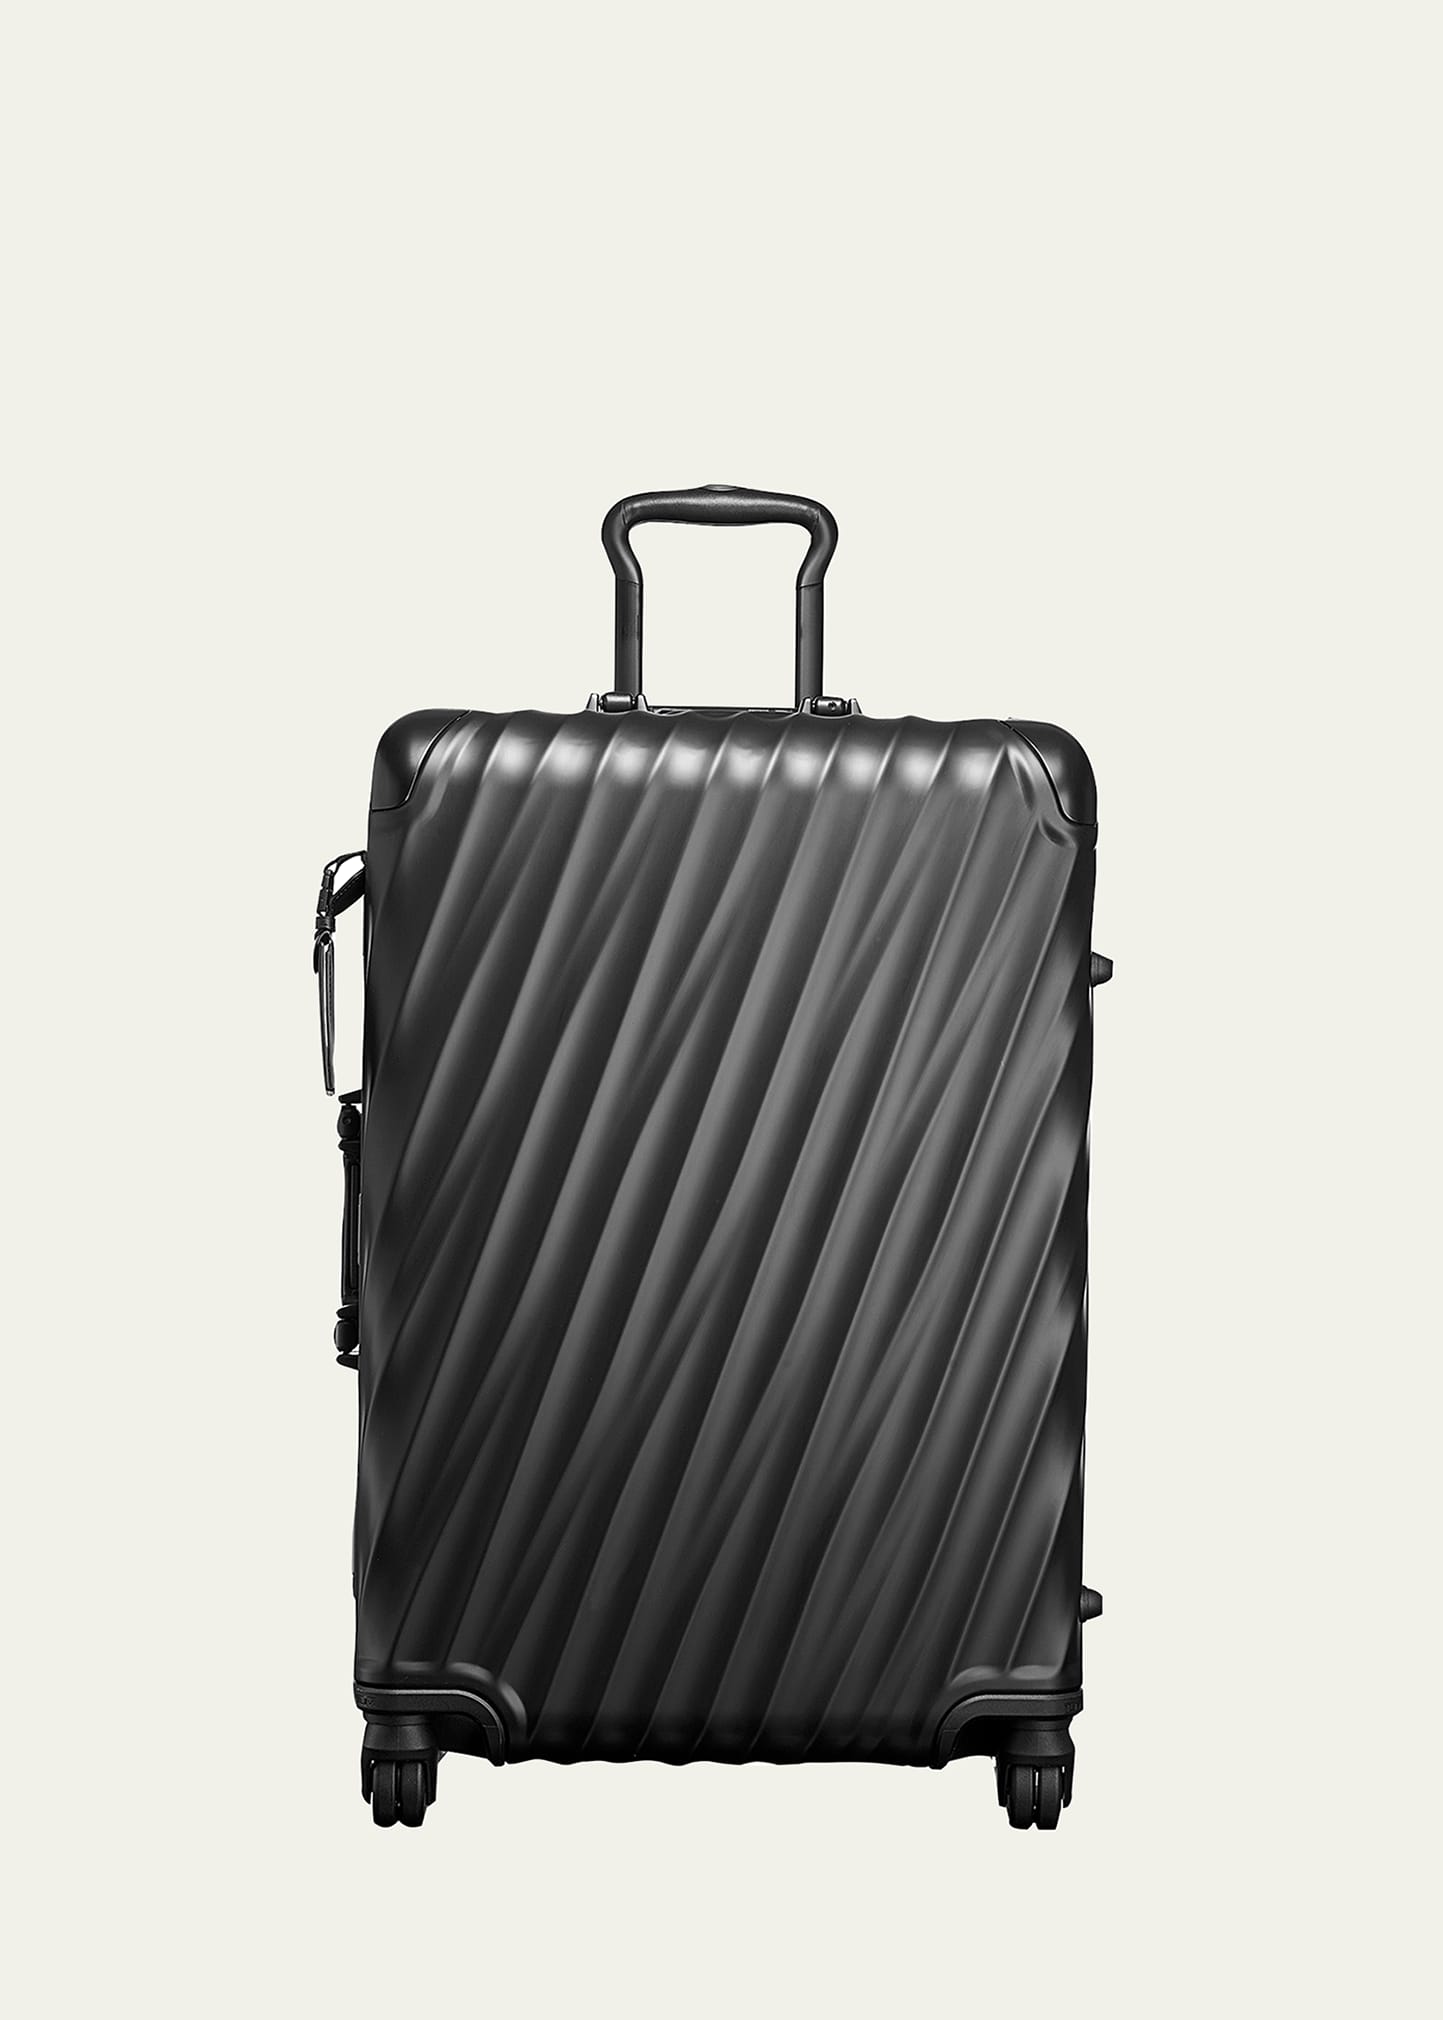 Short Trip Packing Carry-On Luggage, Black